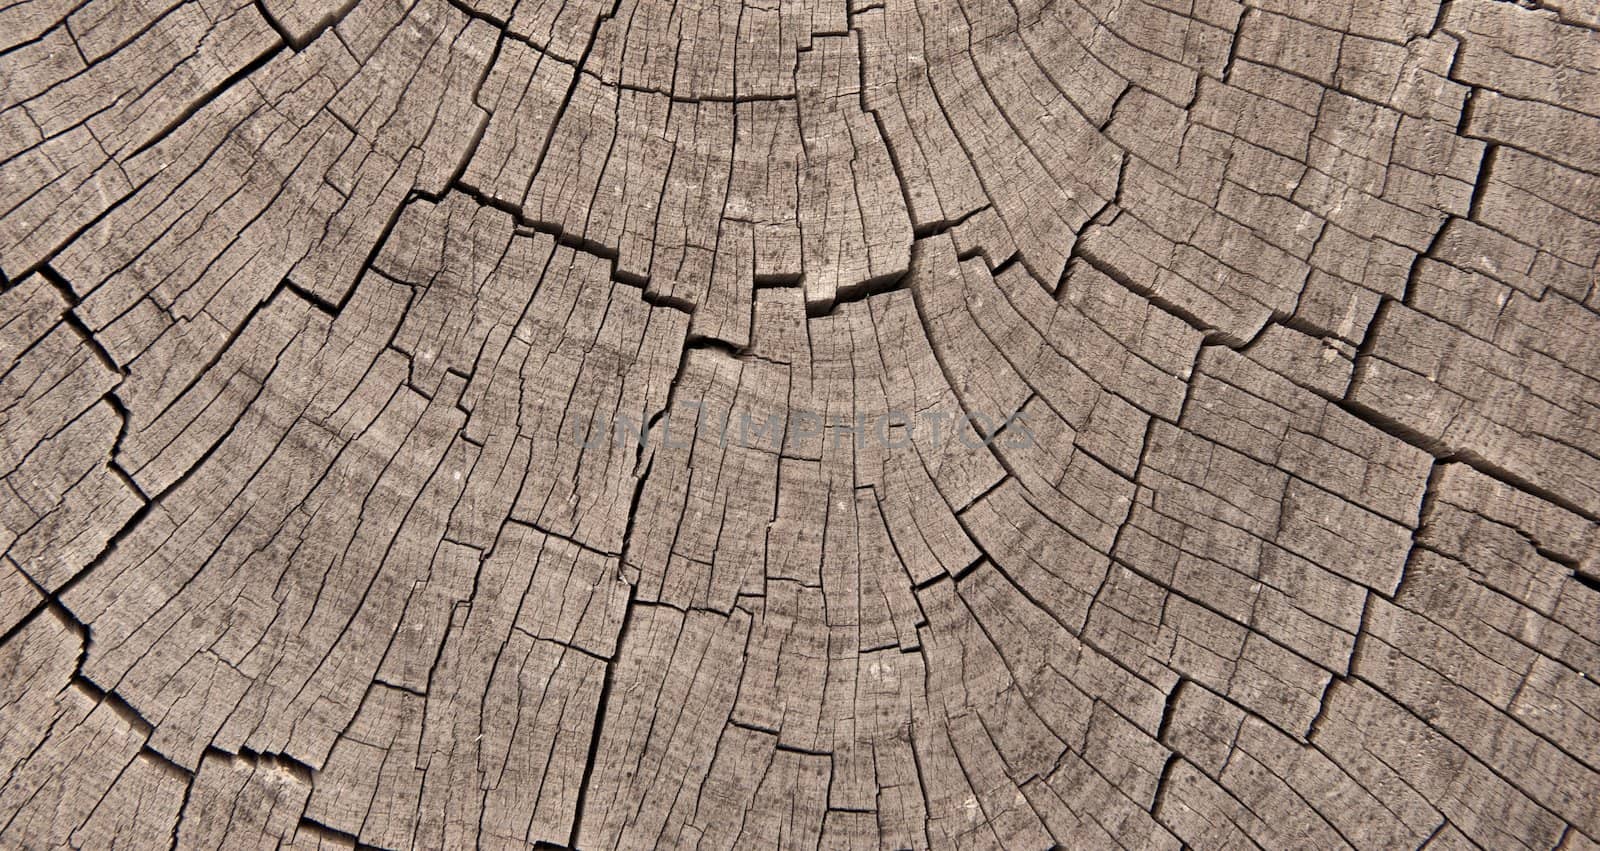 Crosssection of Exposed Tree Trunk Rings by pixelsnap